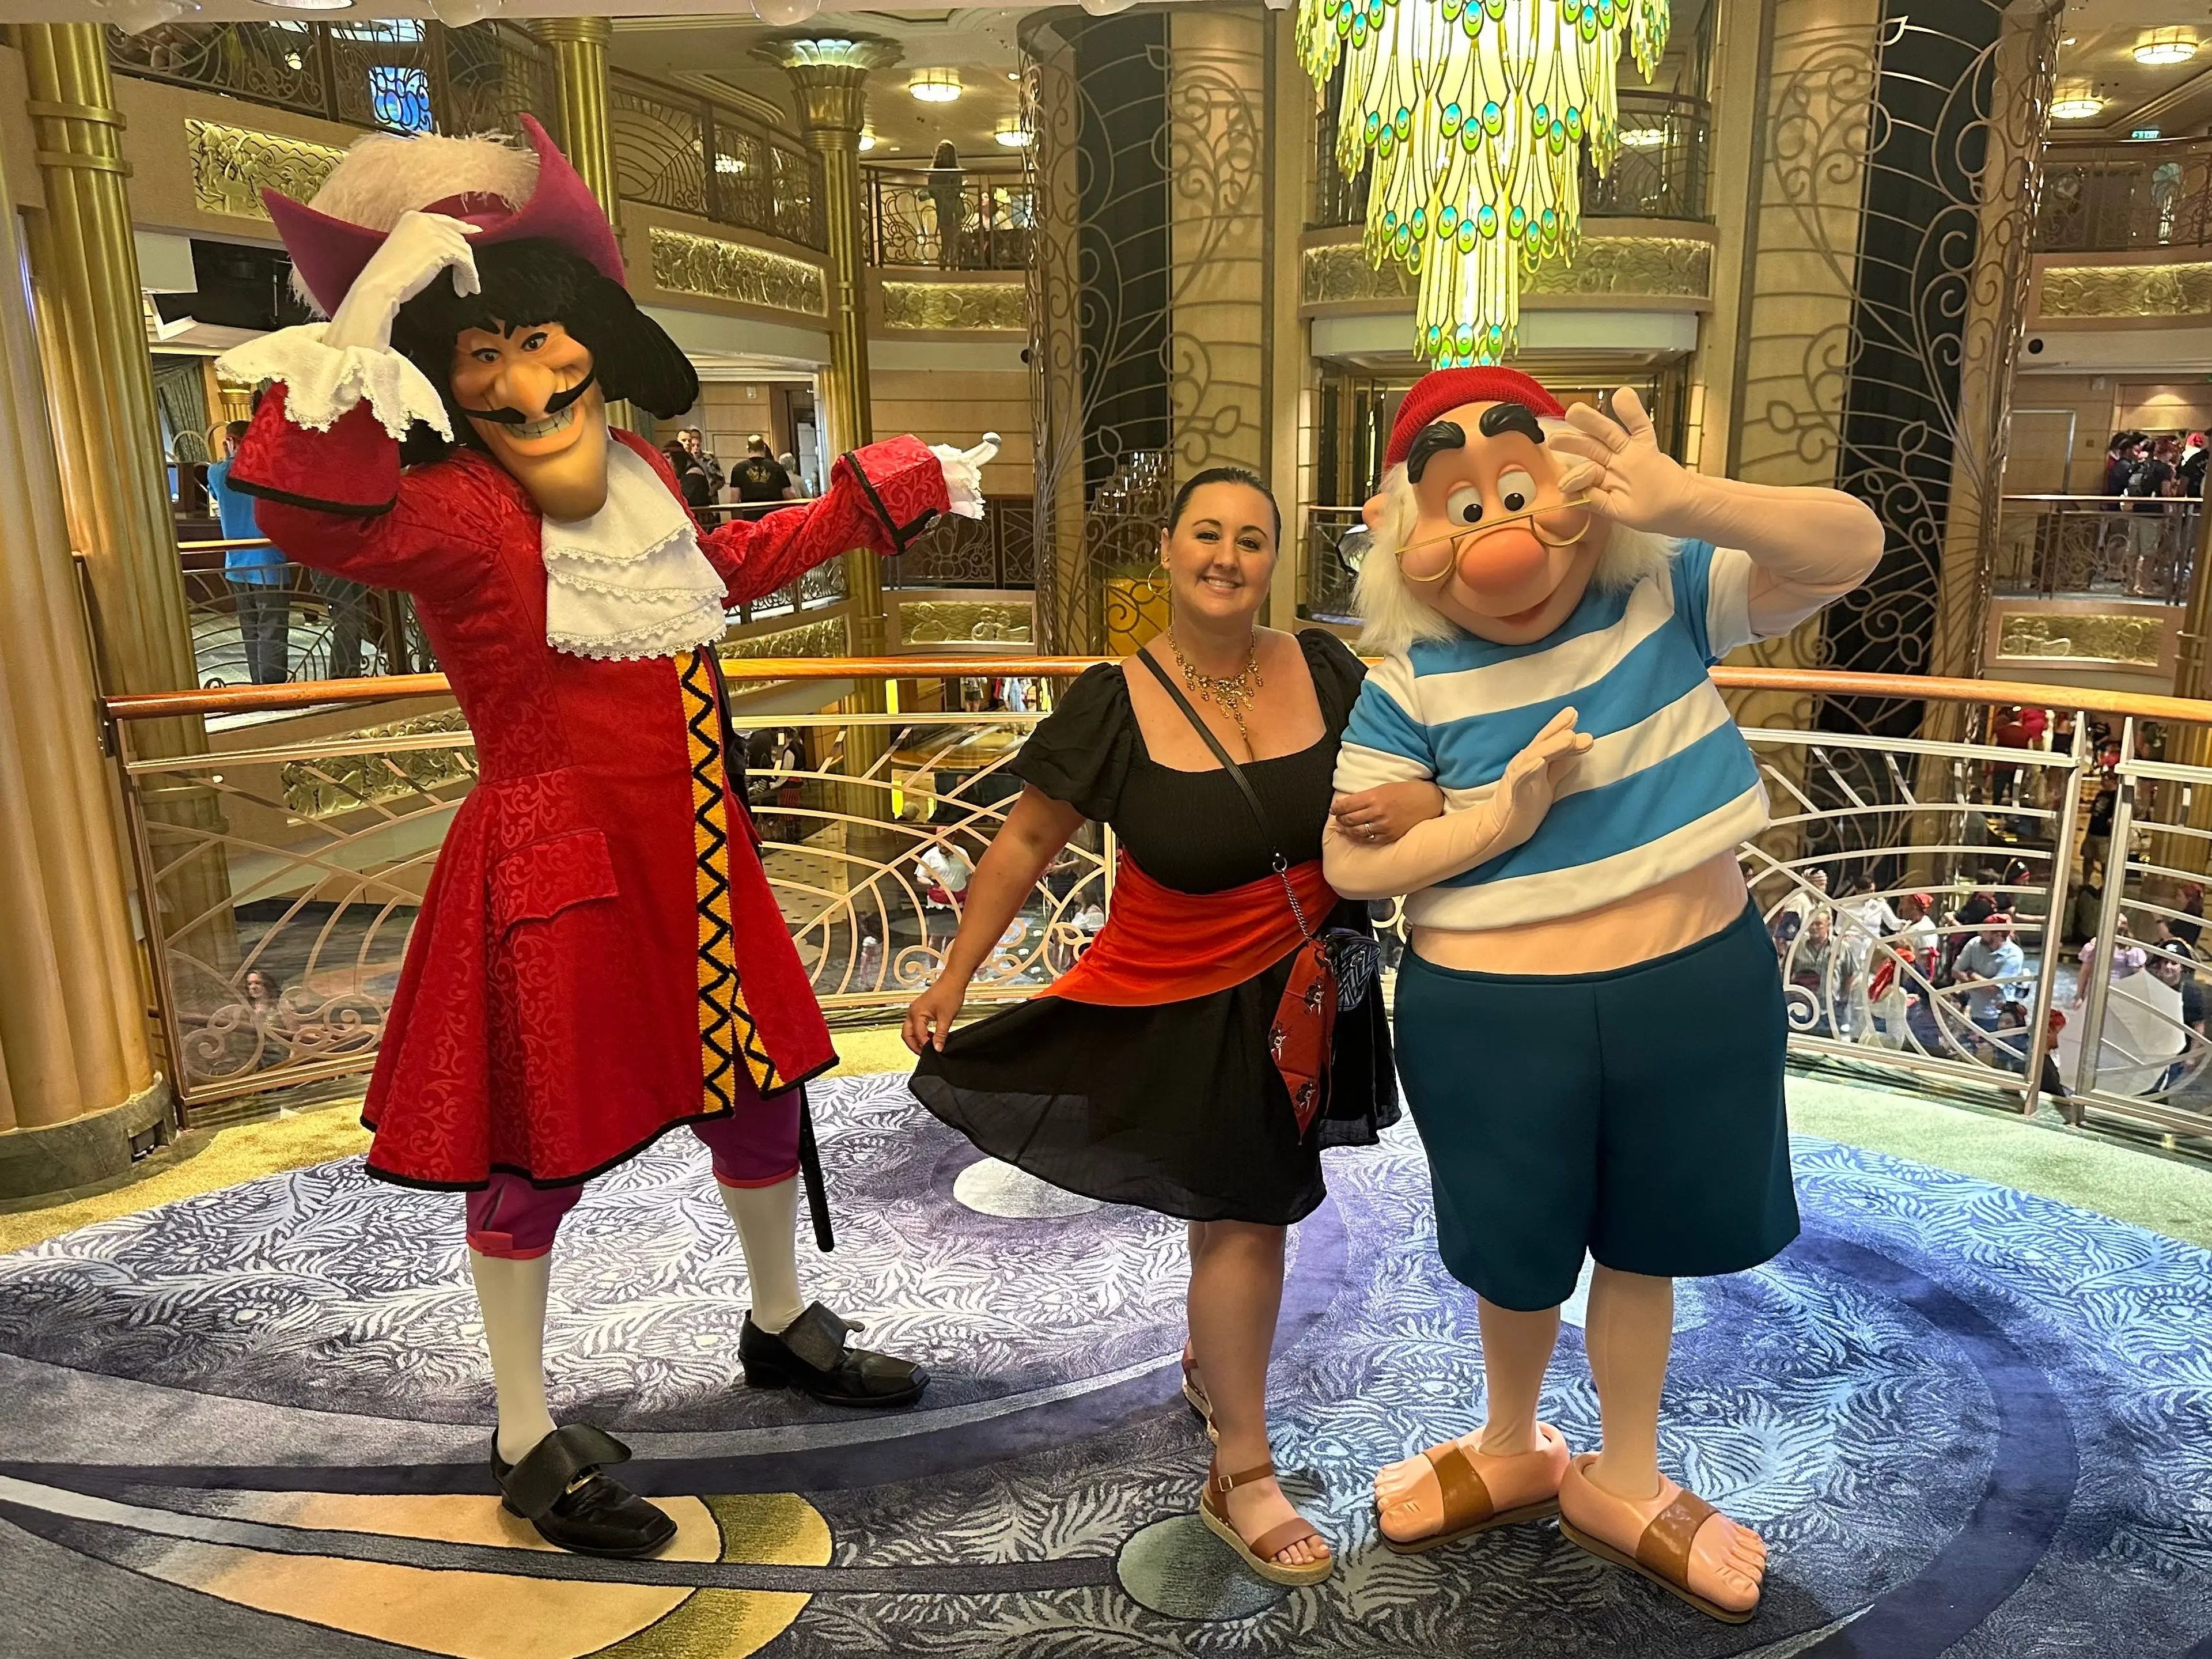 Carly standing between Captain Hook and Smee on a Disney Cruise ship.